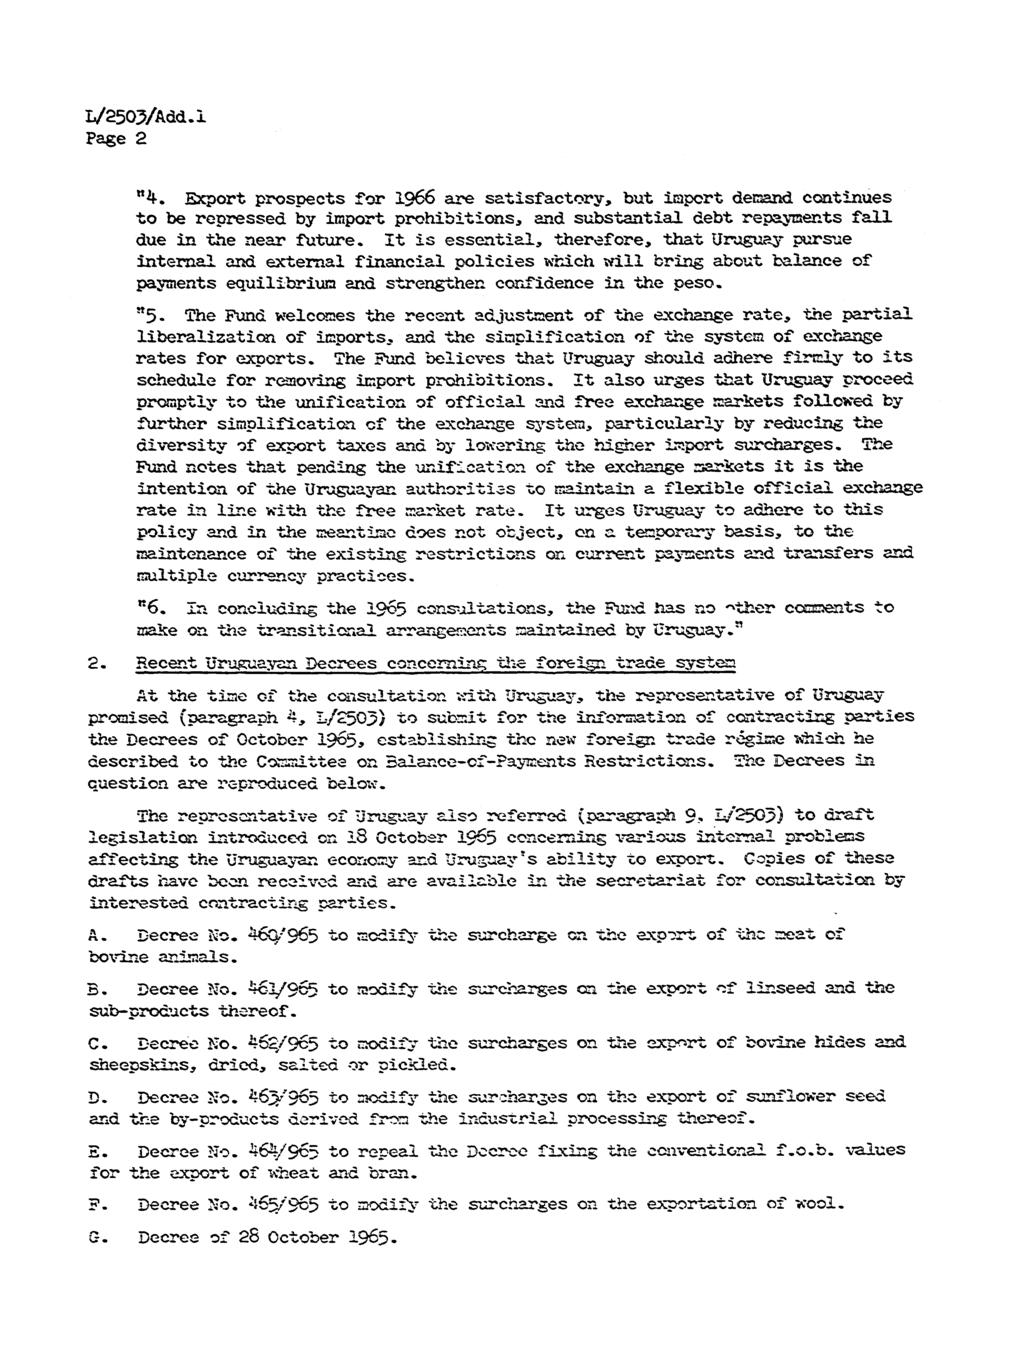 Page 2 "4. Export prospects for 1966 are satisfactory, but import demand continues to be repressed by import prohibitions, and substantial debt repayments fall due in the near future.